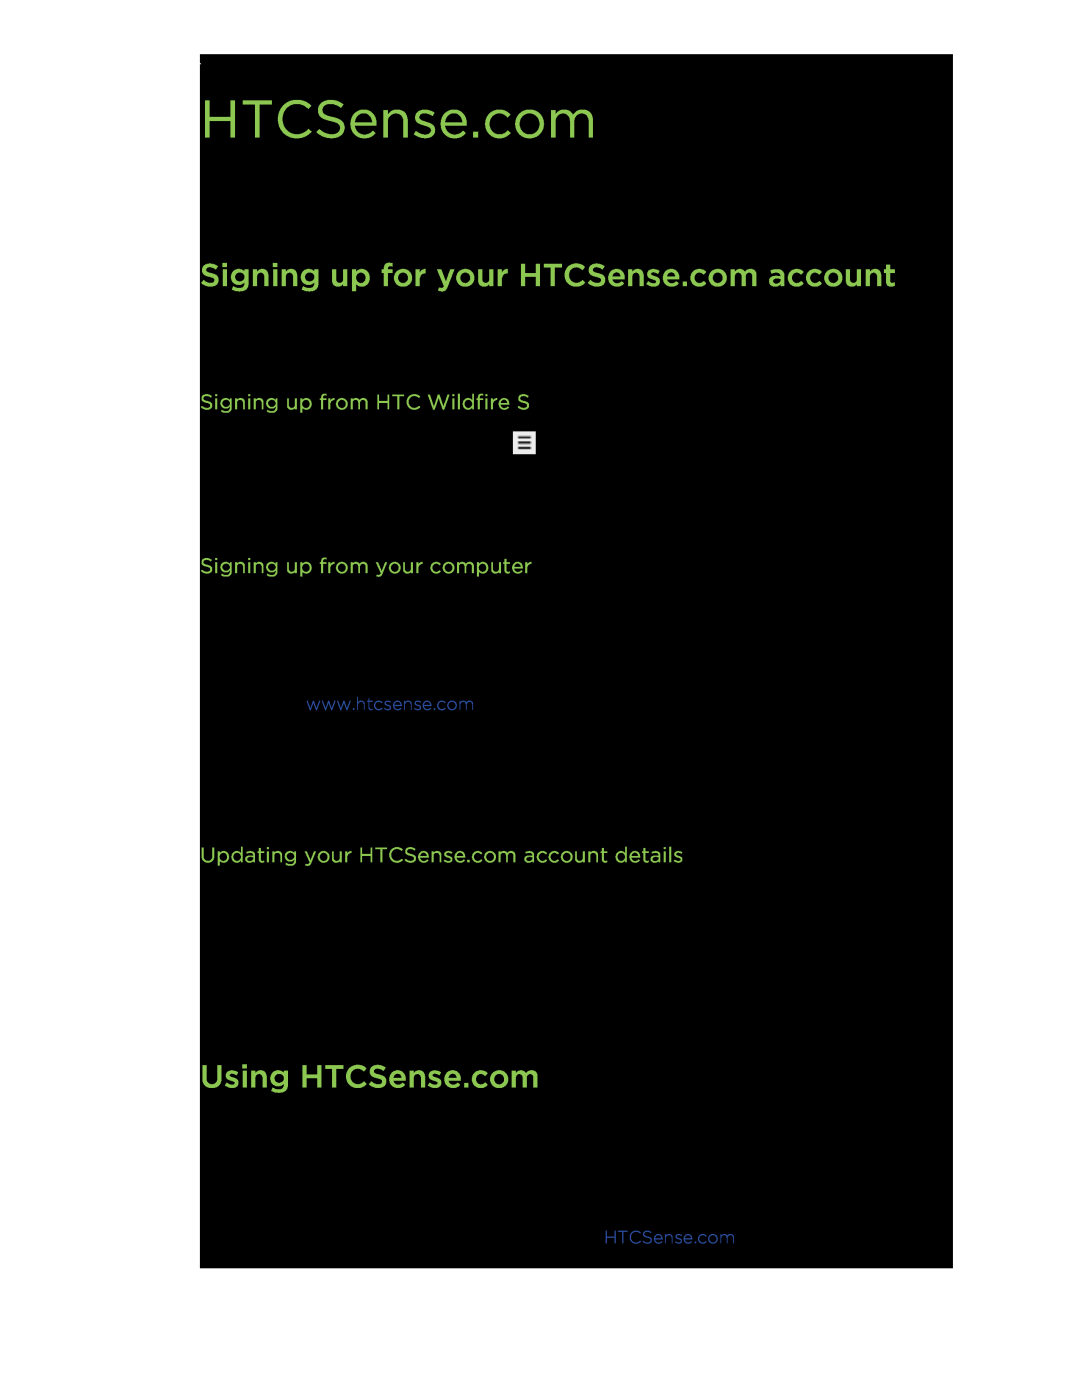 HTC manual Signing up for your HTCSense.com account, Using HTCSense.com, Signing up from HTC Wildfire S 